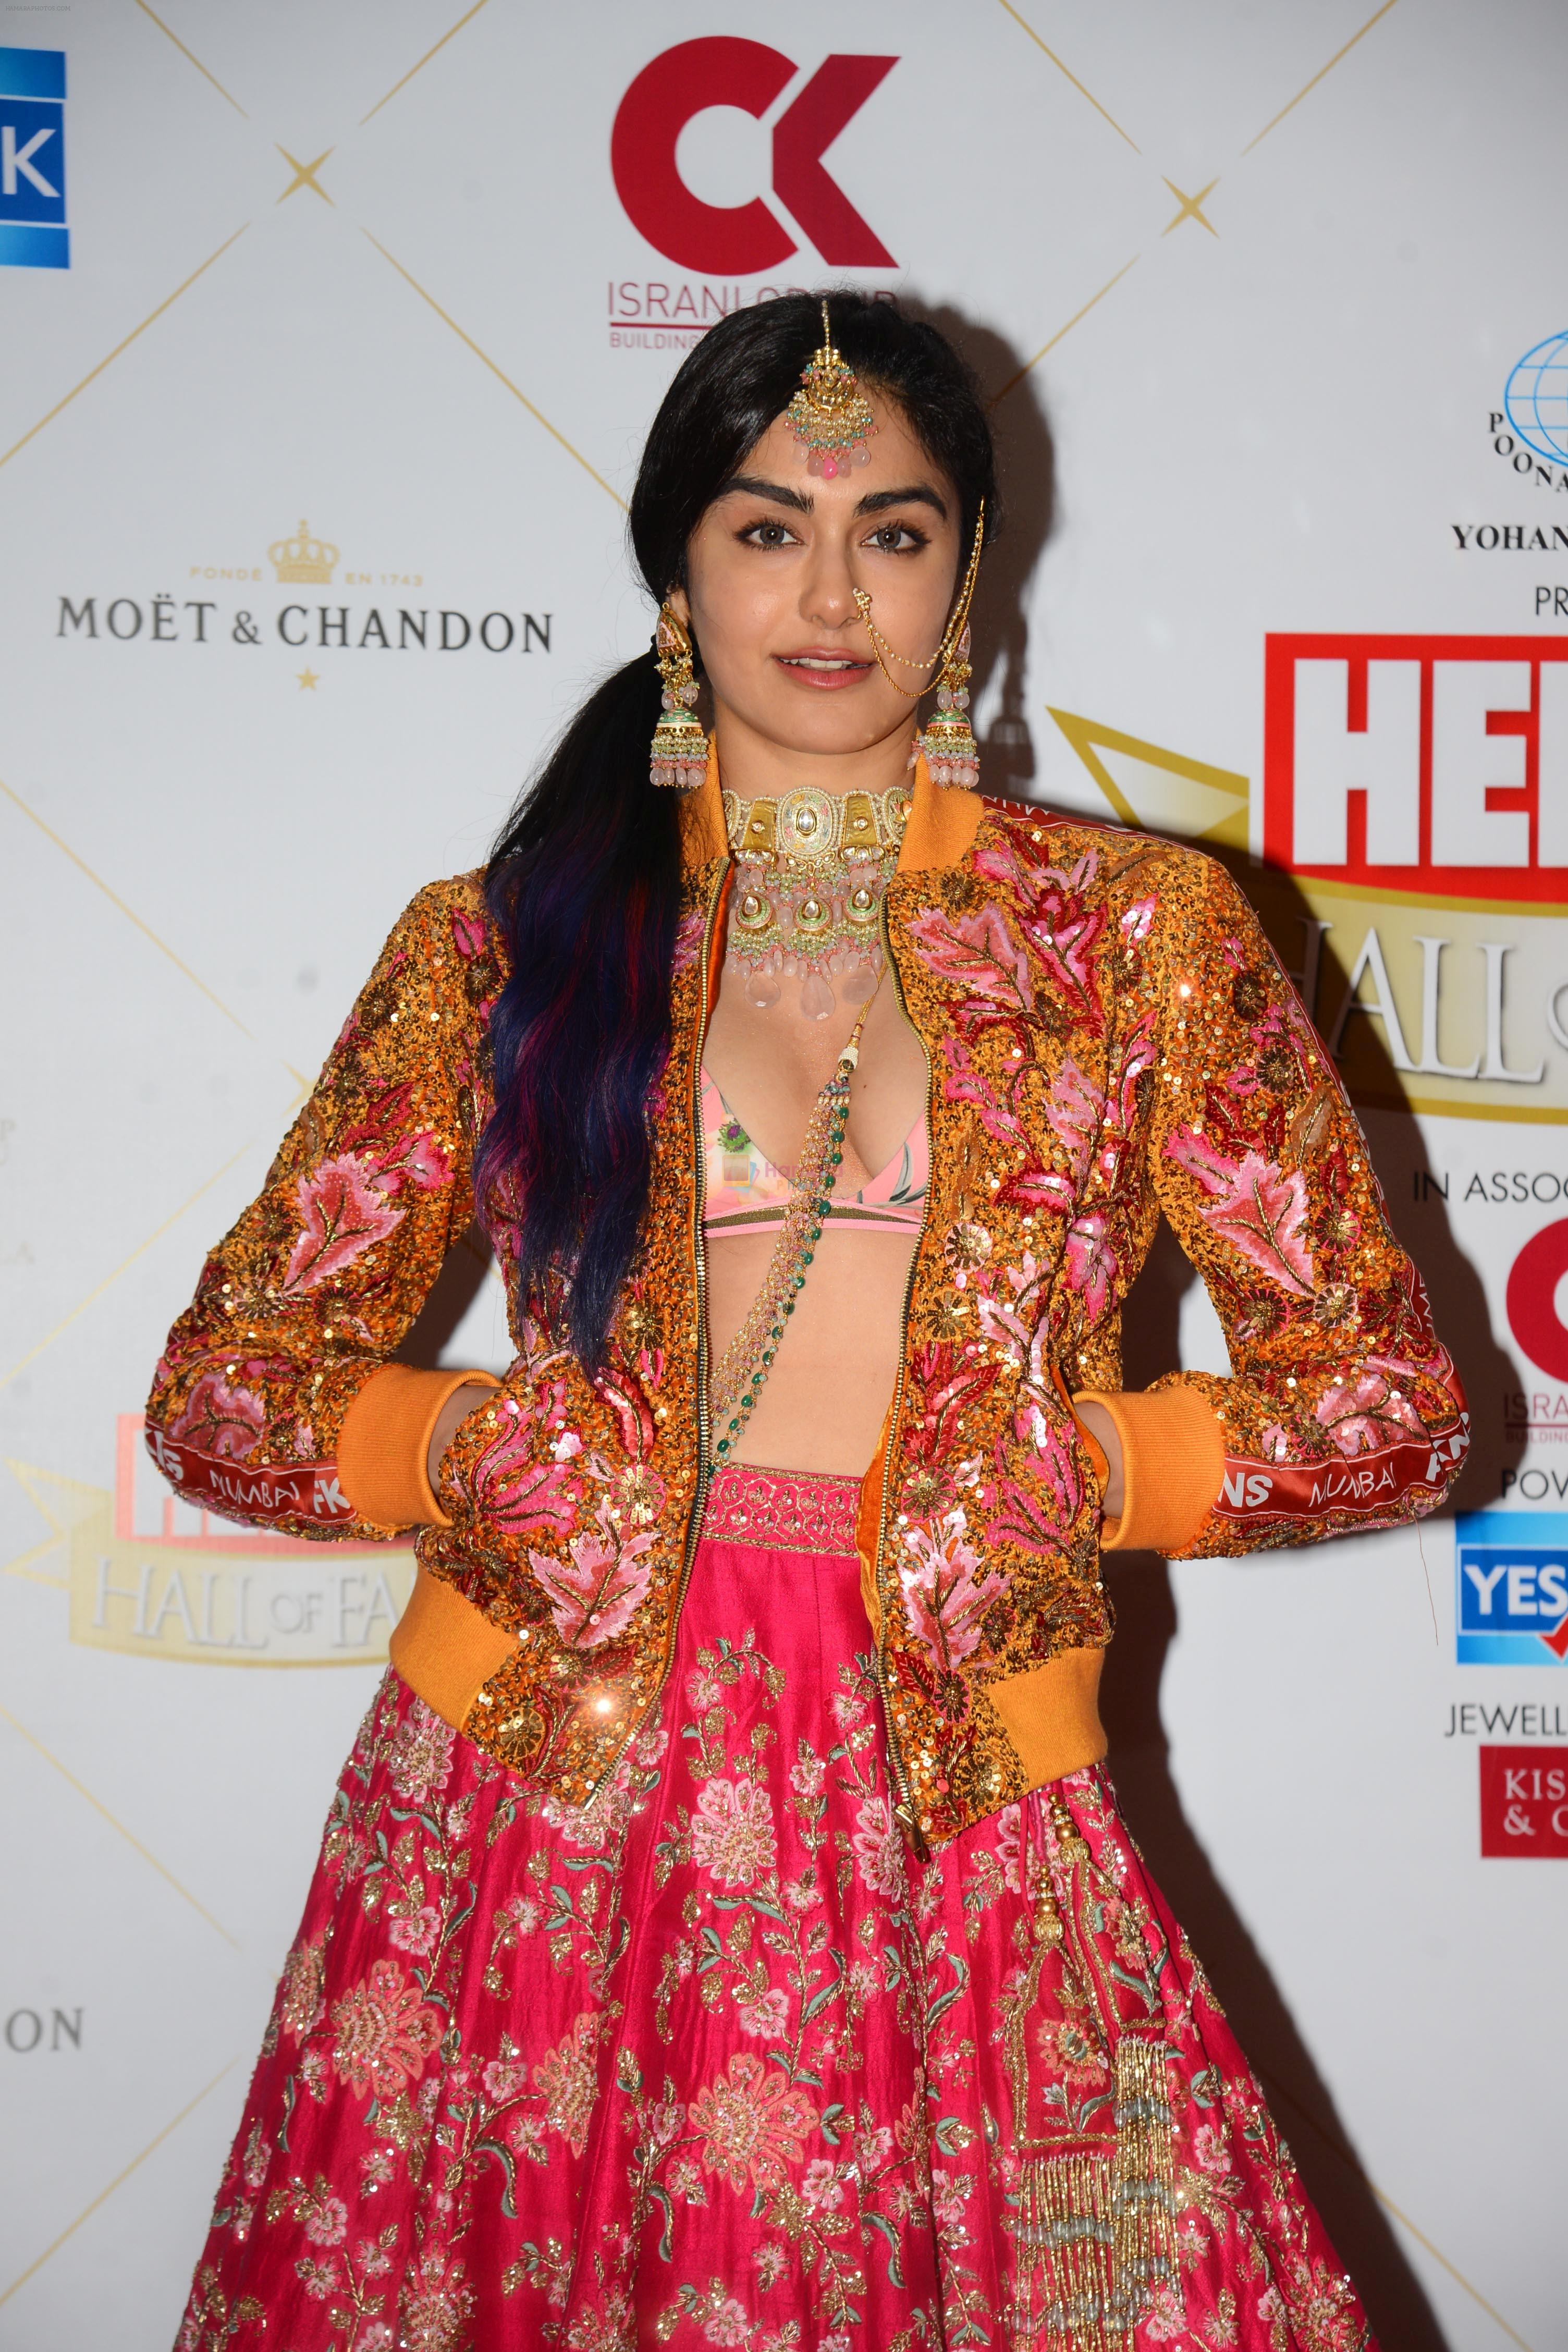 Adah Sharma at the Hello Hall of Fame Awards in St Regis hotel on 18th March 2019